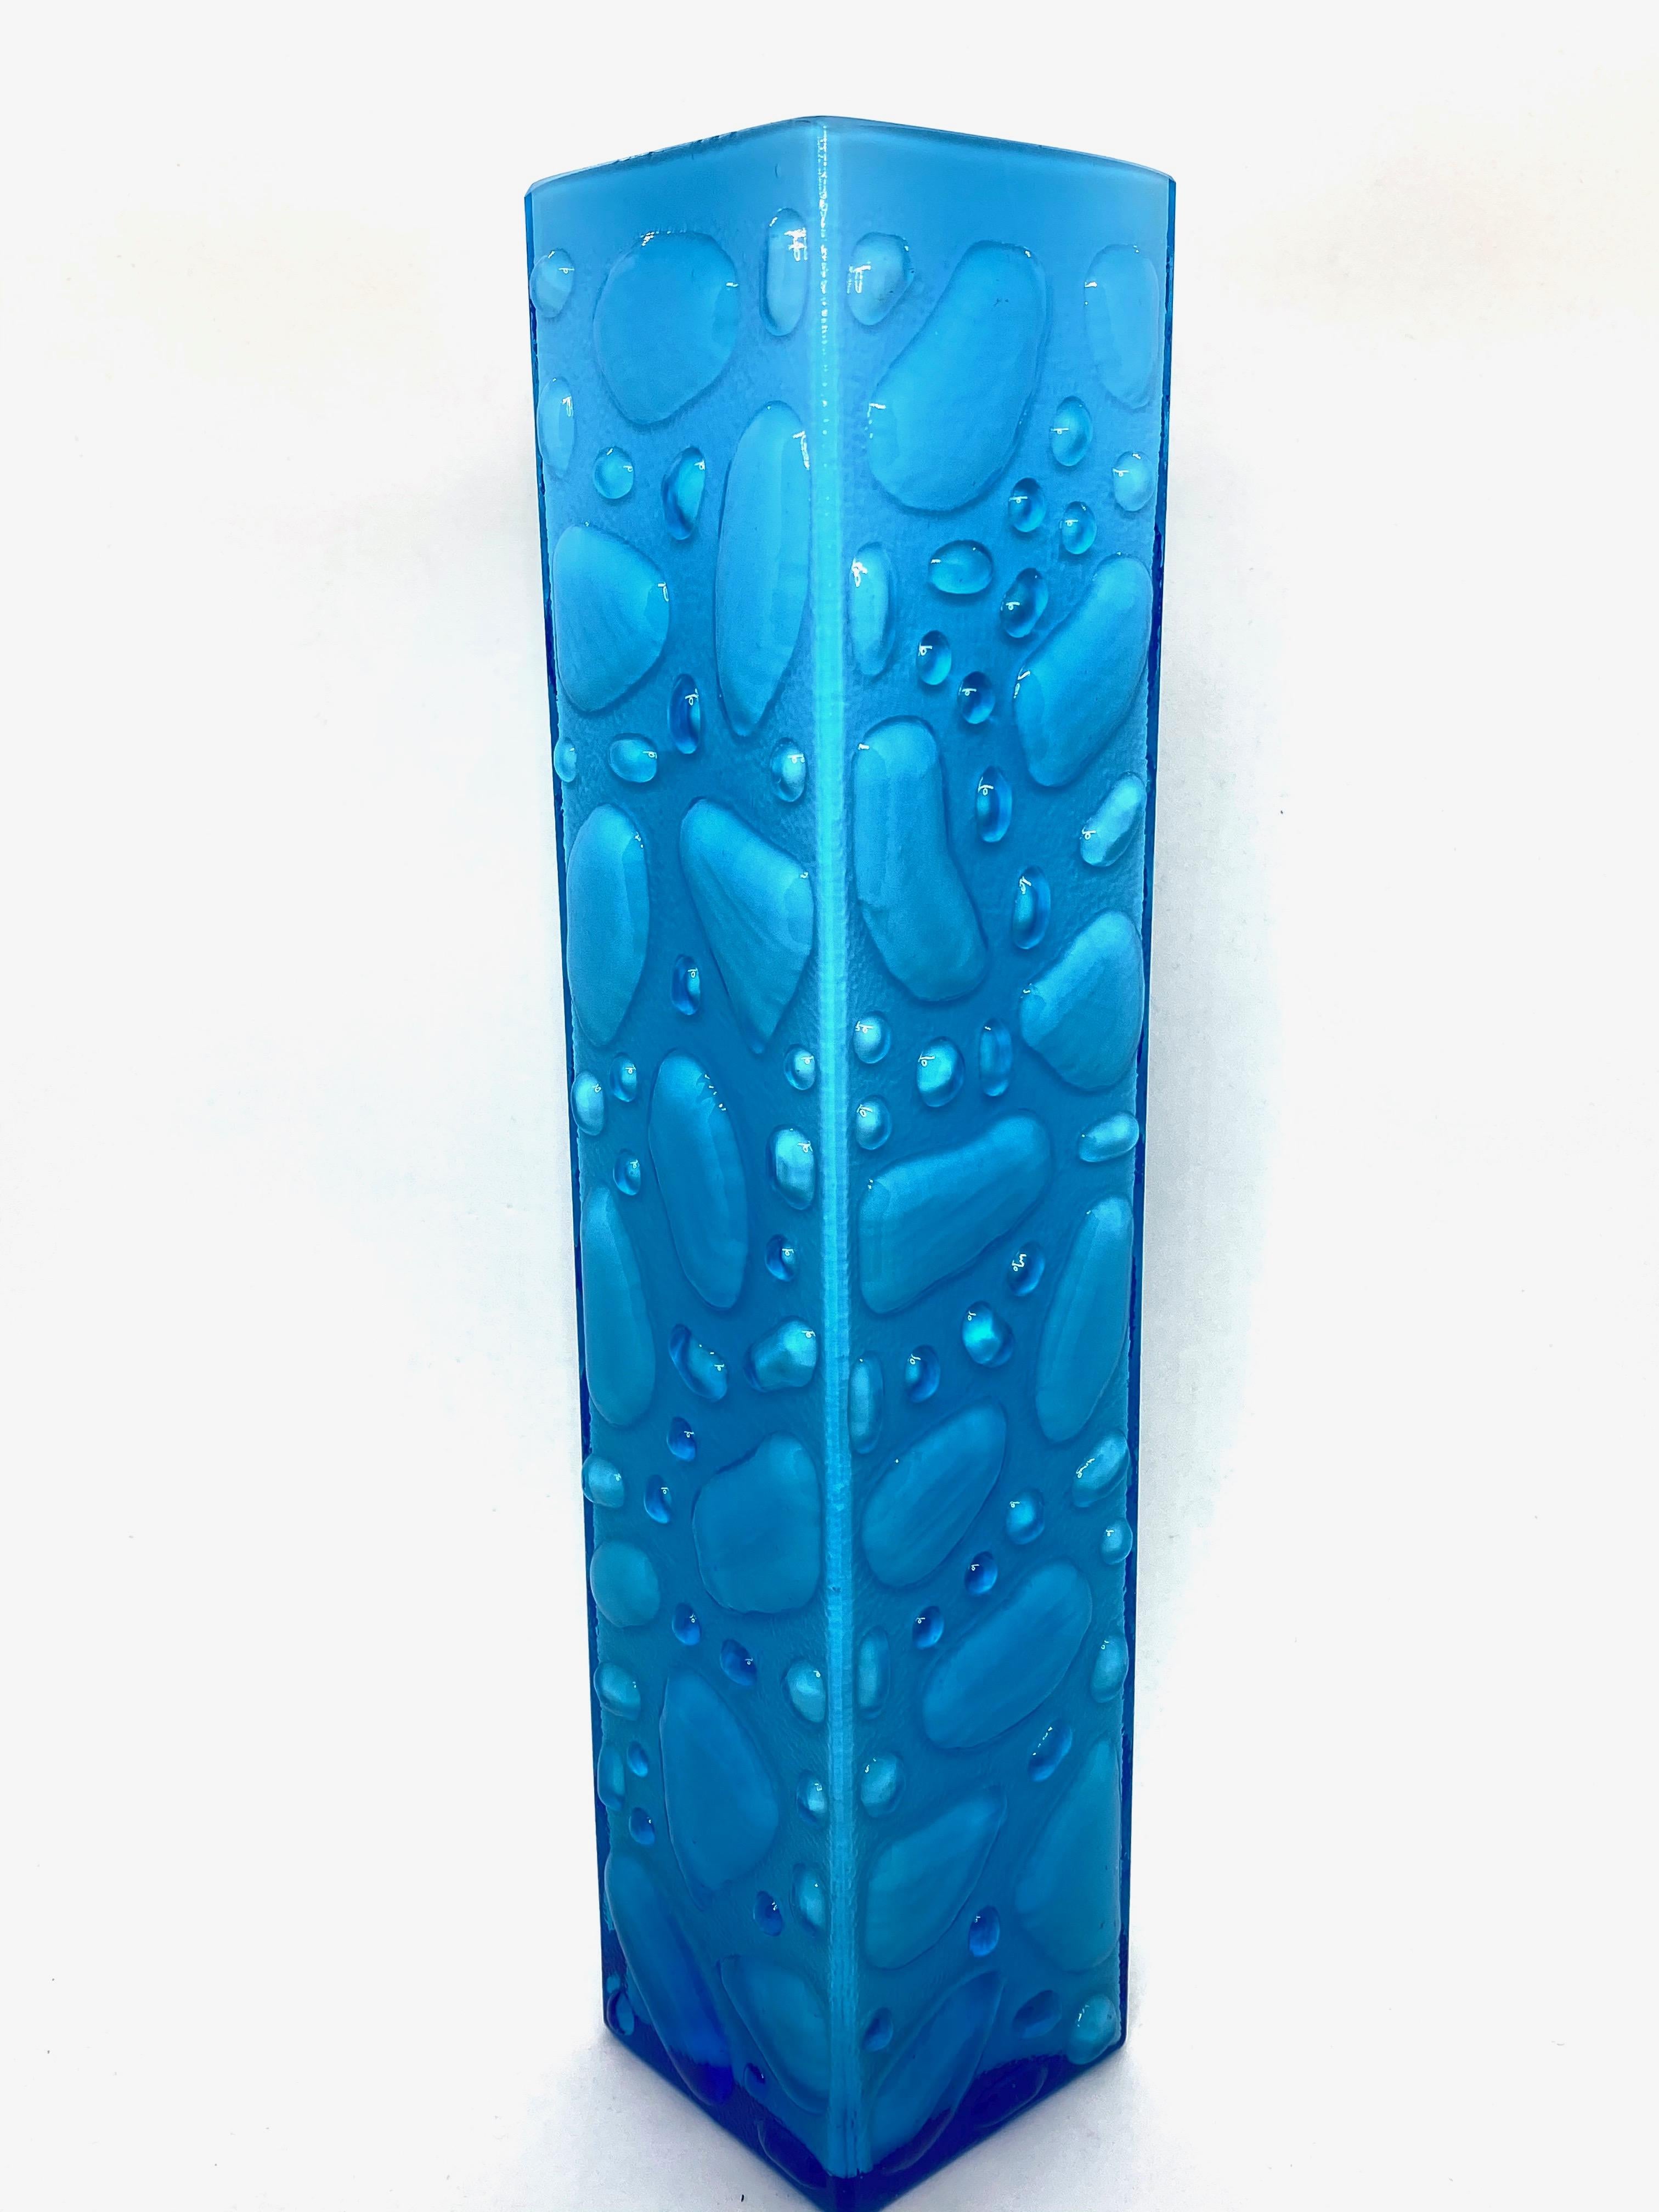 Wonderful Mid-Century Modern German vase by Gral Glas, attributed to be designed by Emil Funke, circa 1970. This beautiful turquoise or light blue colored and clear vases brings a touch of fun and fantasy to any room. A nice addition to any room.